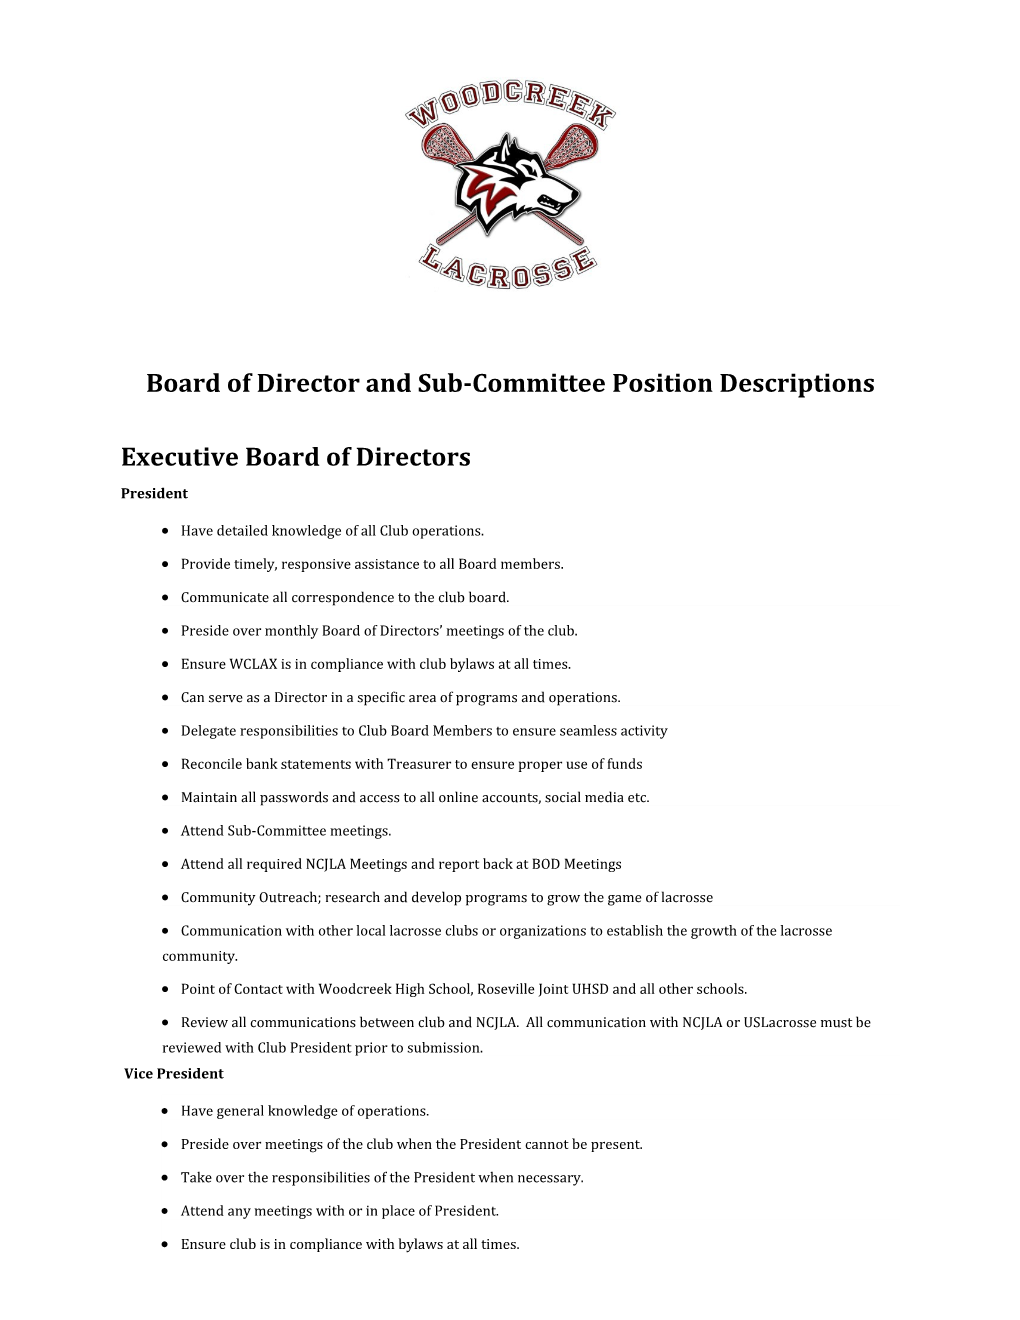 Board of Director and Sub-Committee Position Descriptions